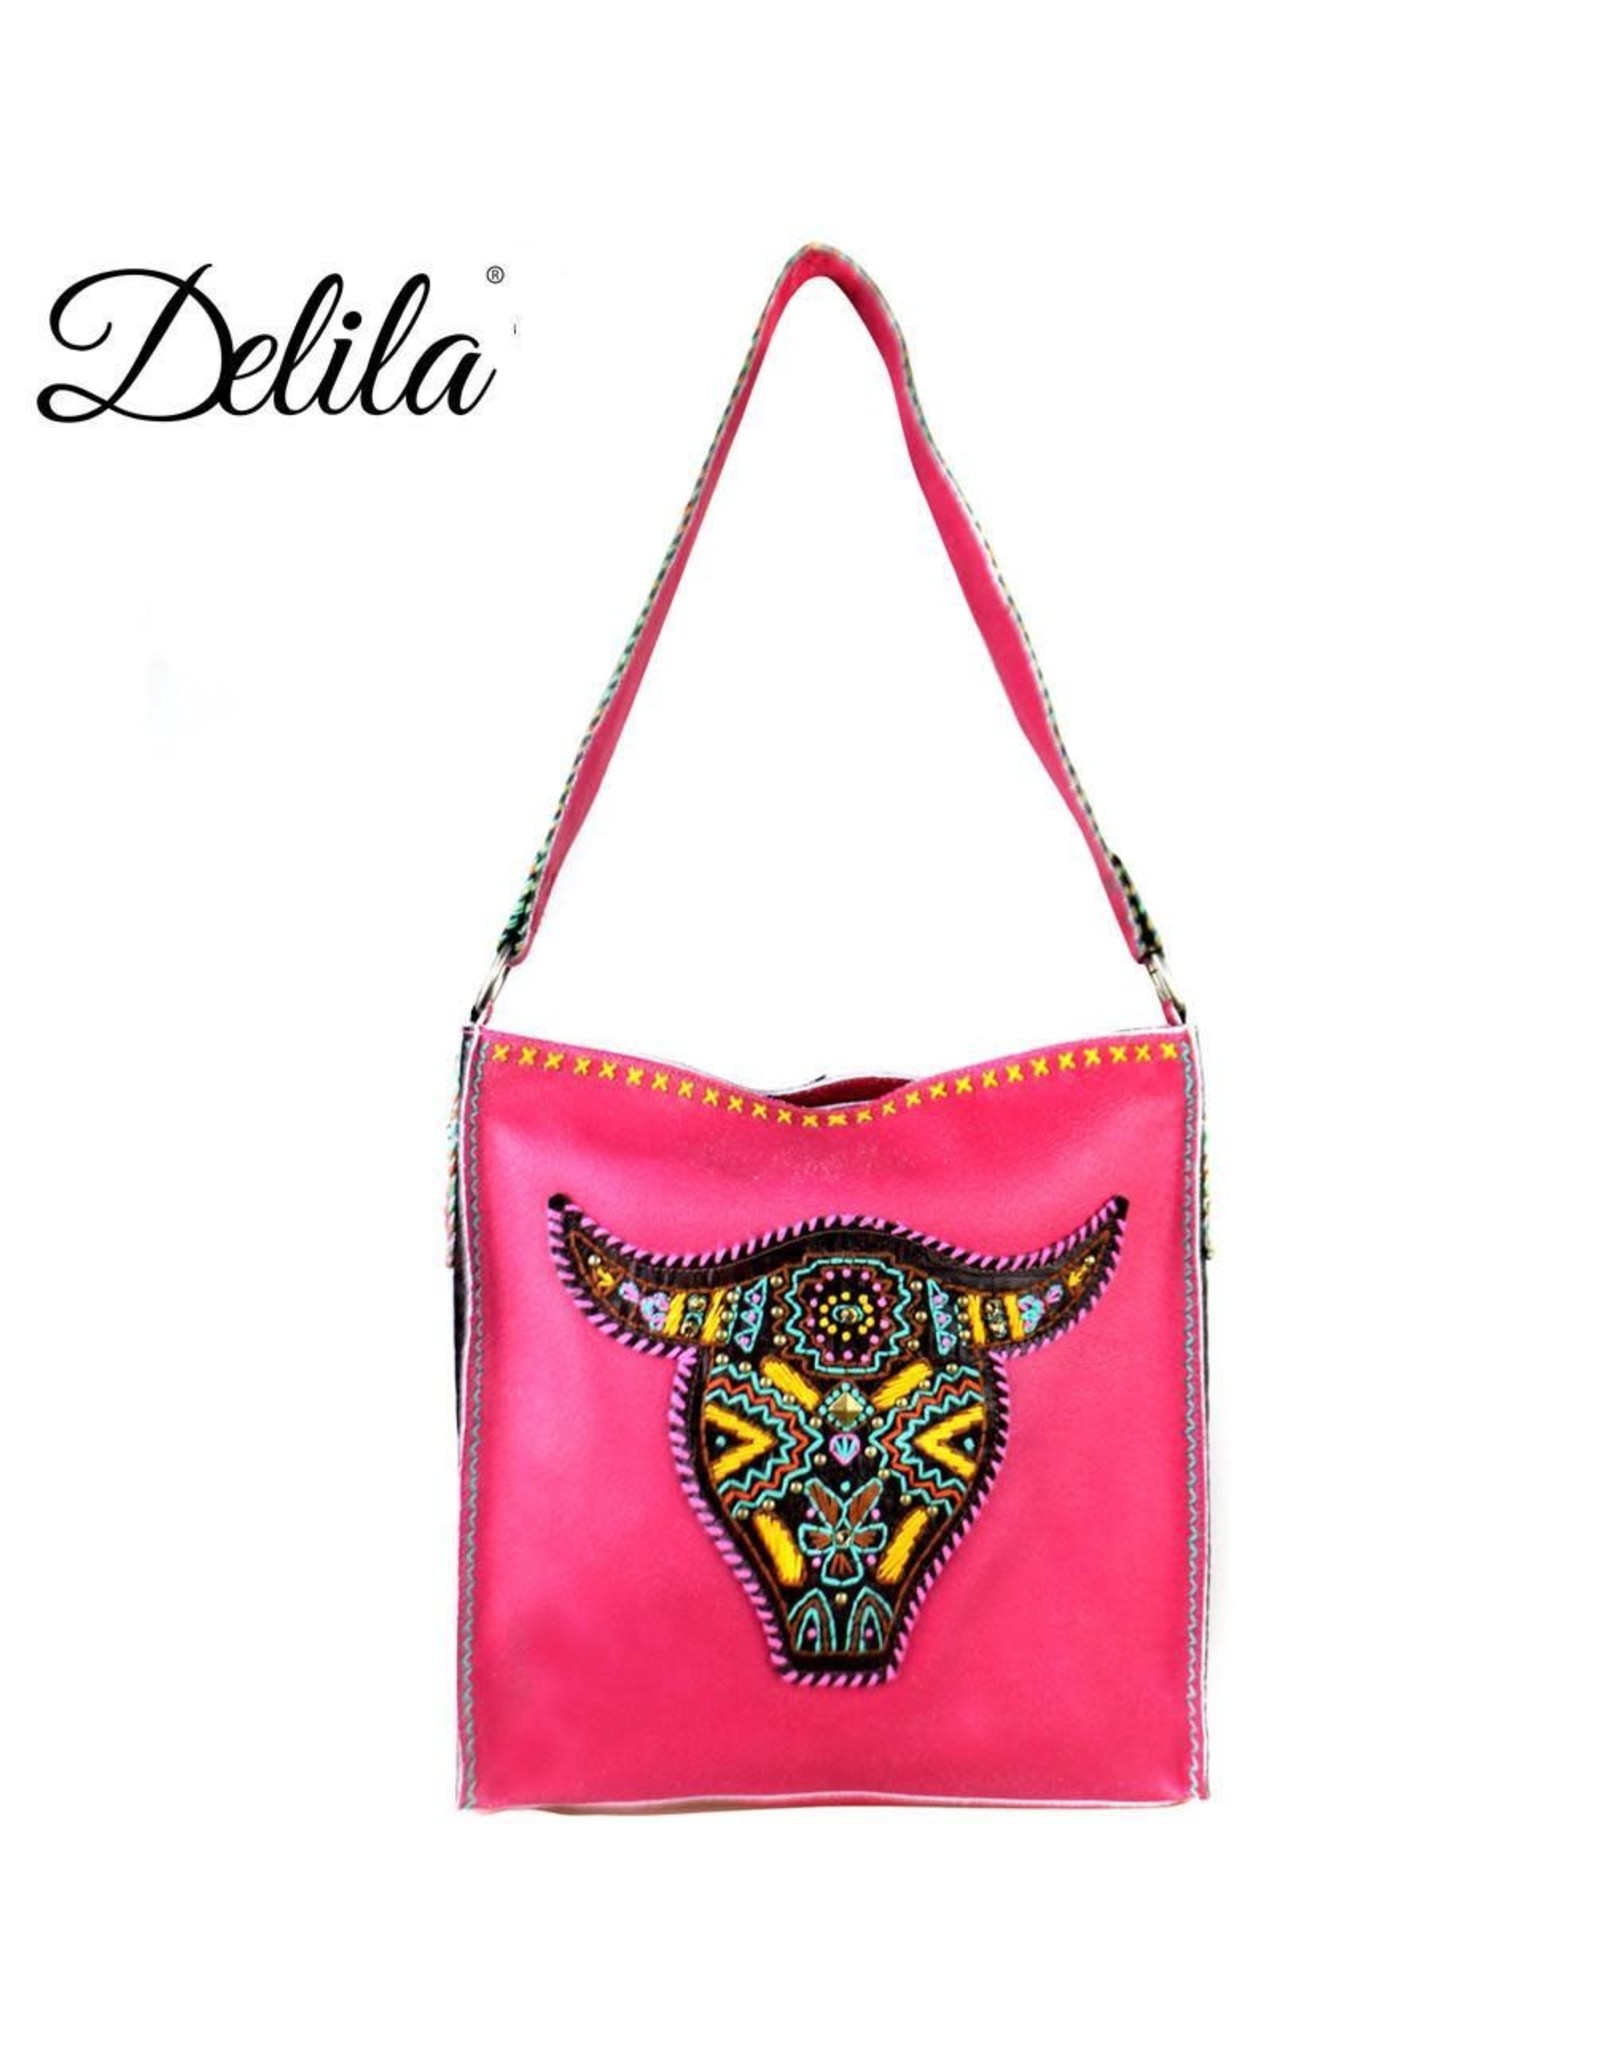 Montana West* Delilia 100% Genuine Leather Hand Embroidered Collection Tote Bag - Hot Pink - LAT-630LHPK